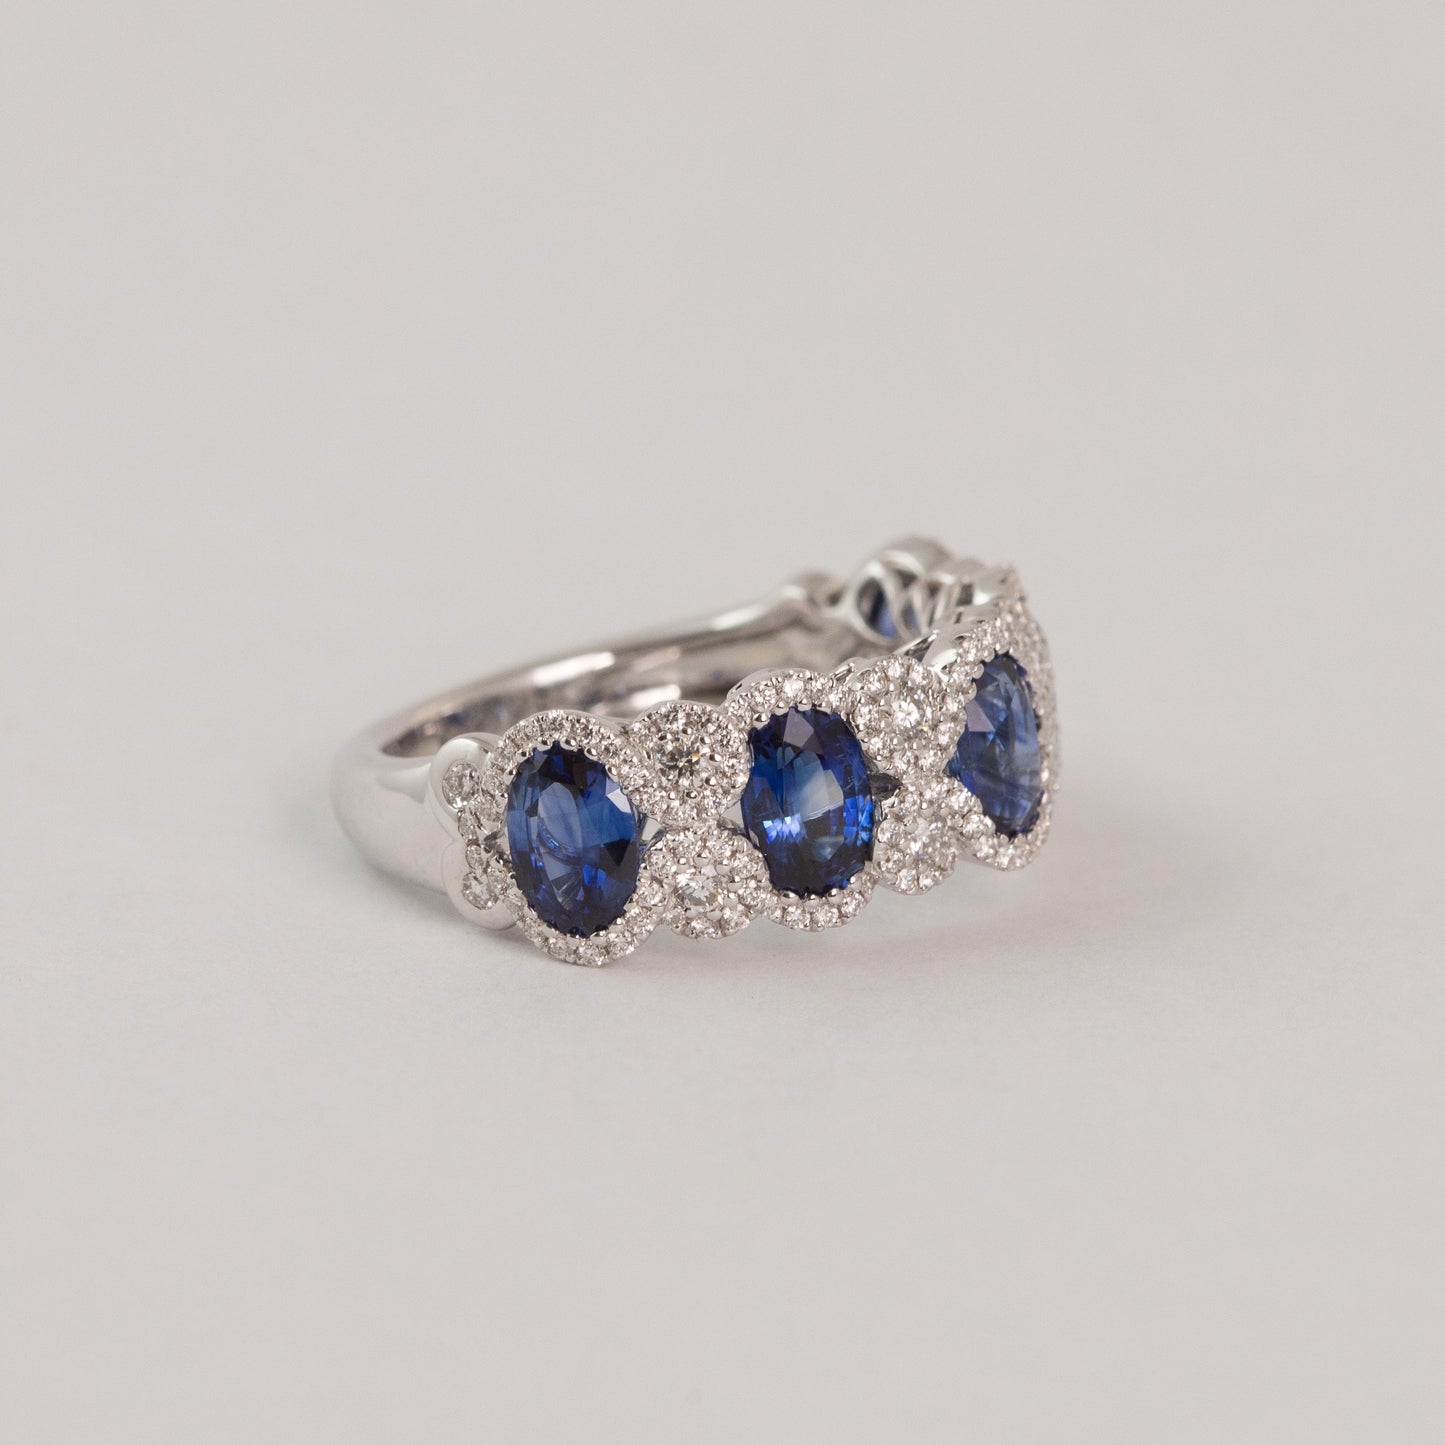 The Sapphire and Diamond Ring